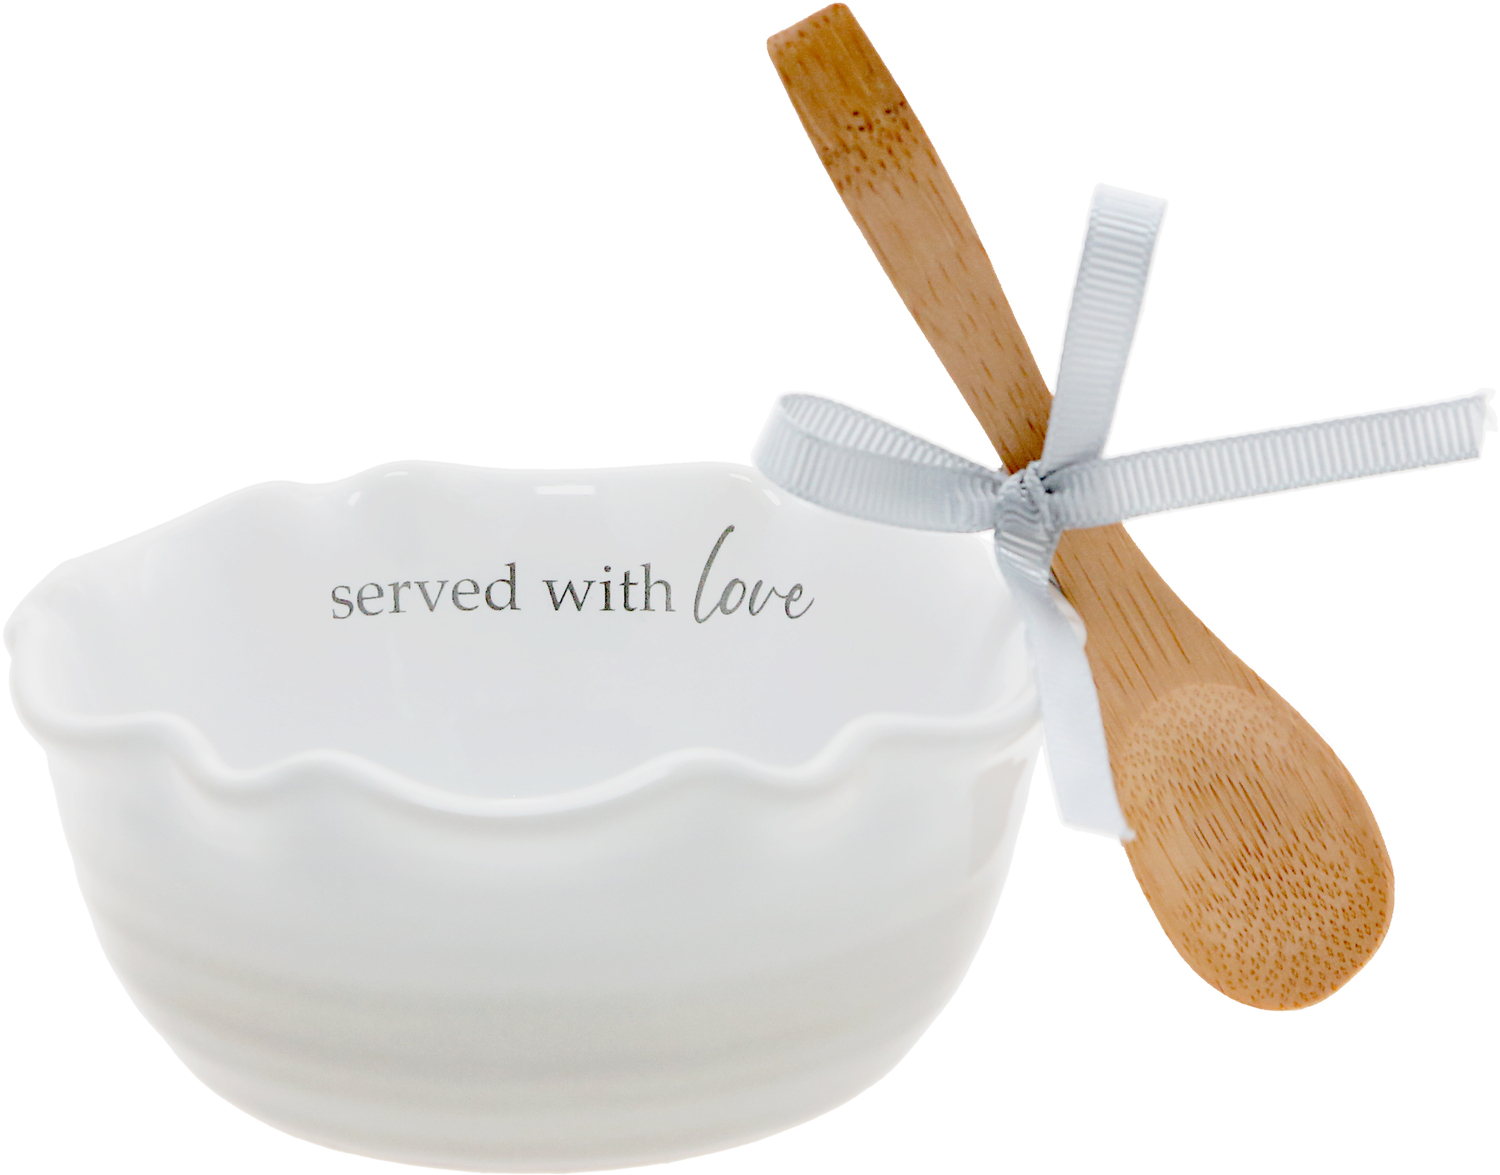 Love by Thoughts of Home - Love - 4.5" Ceramic Bowl with Bamboo Spoon